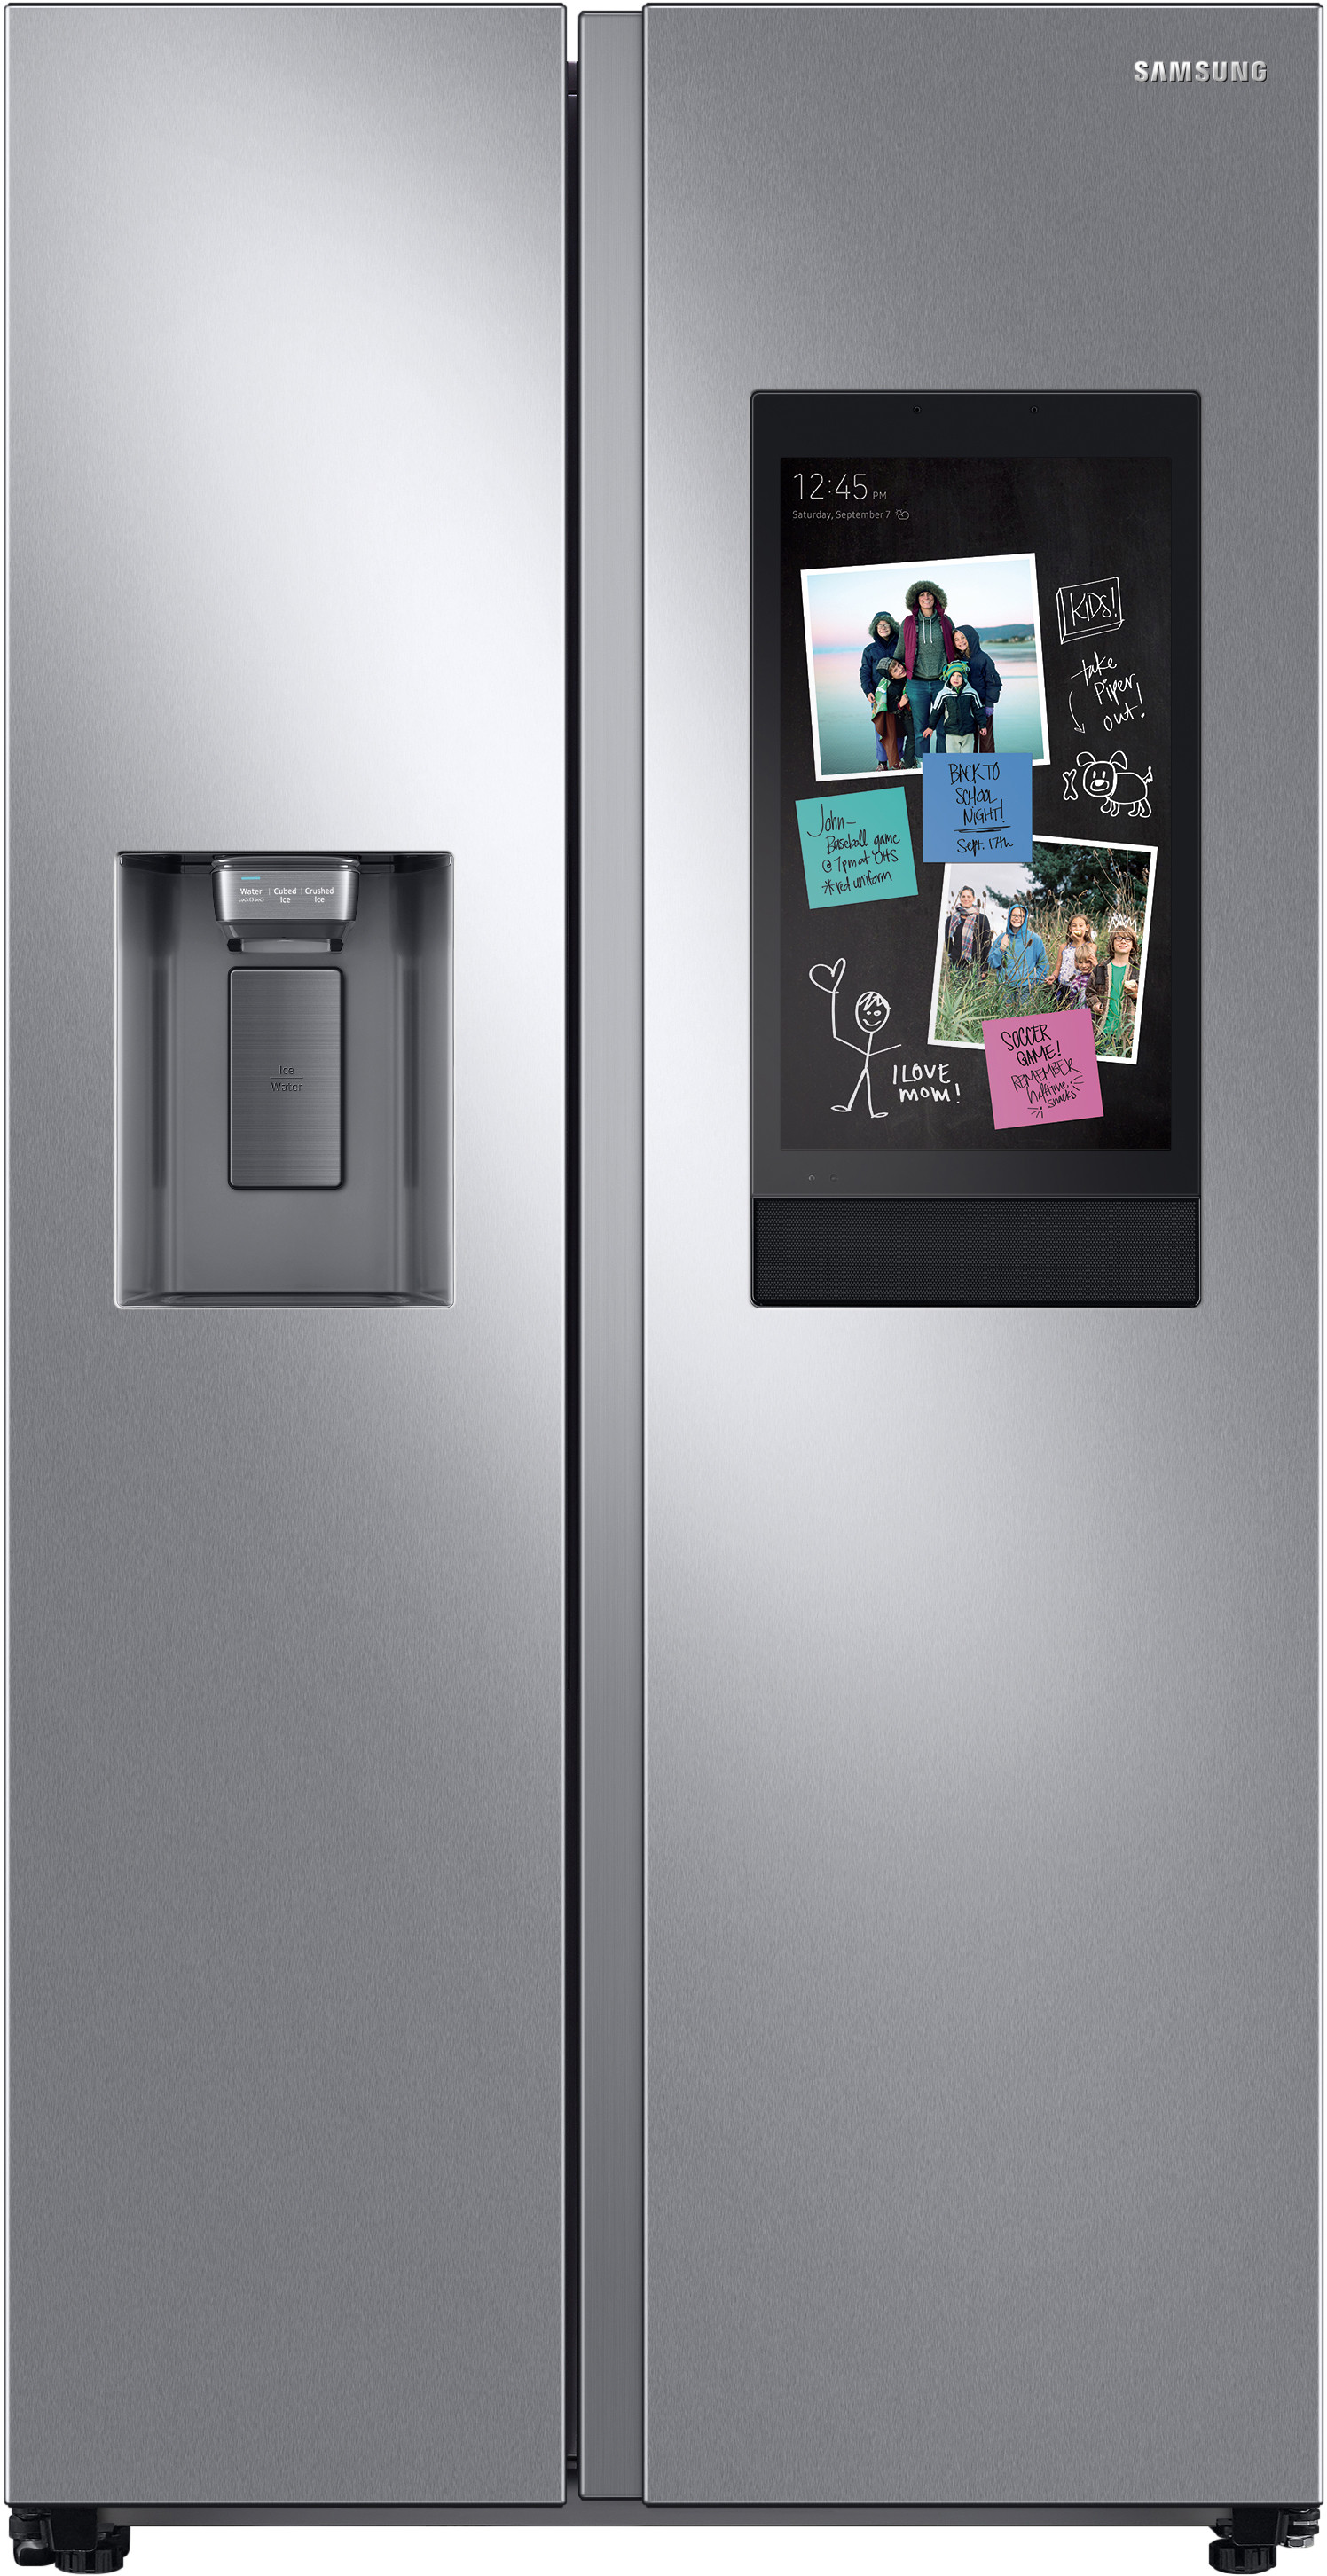 Samsung 36 Inch 36 Counter Depth Side-by-Side Refrigerator RS22T5561SR